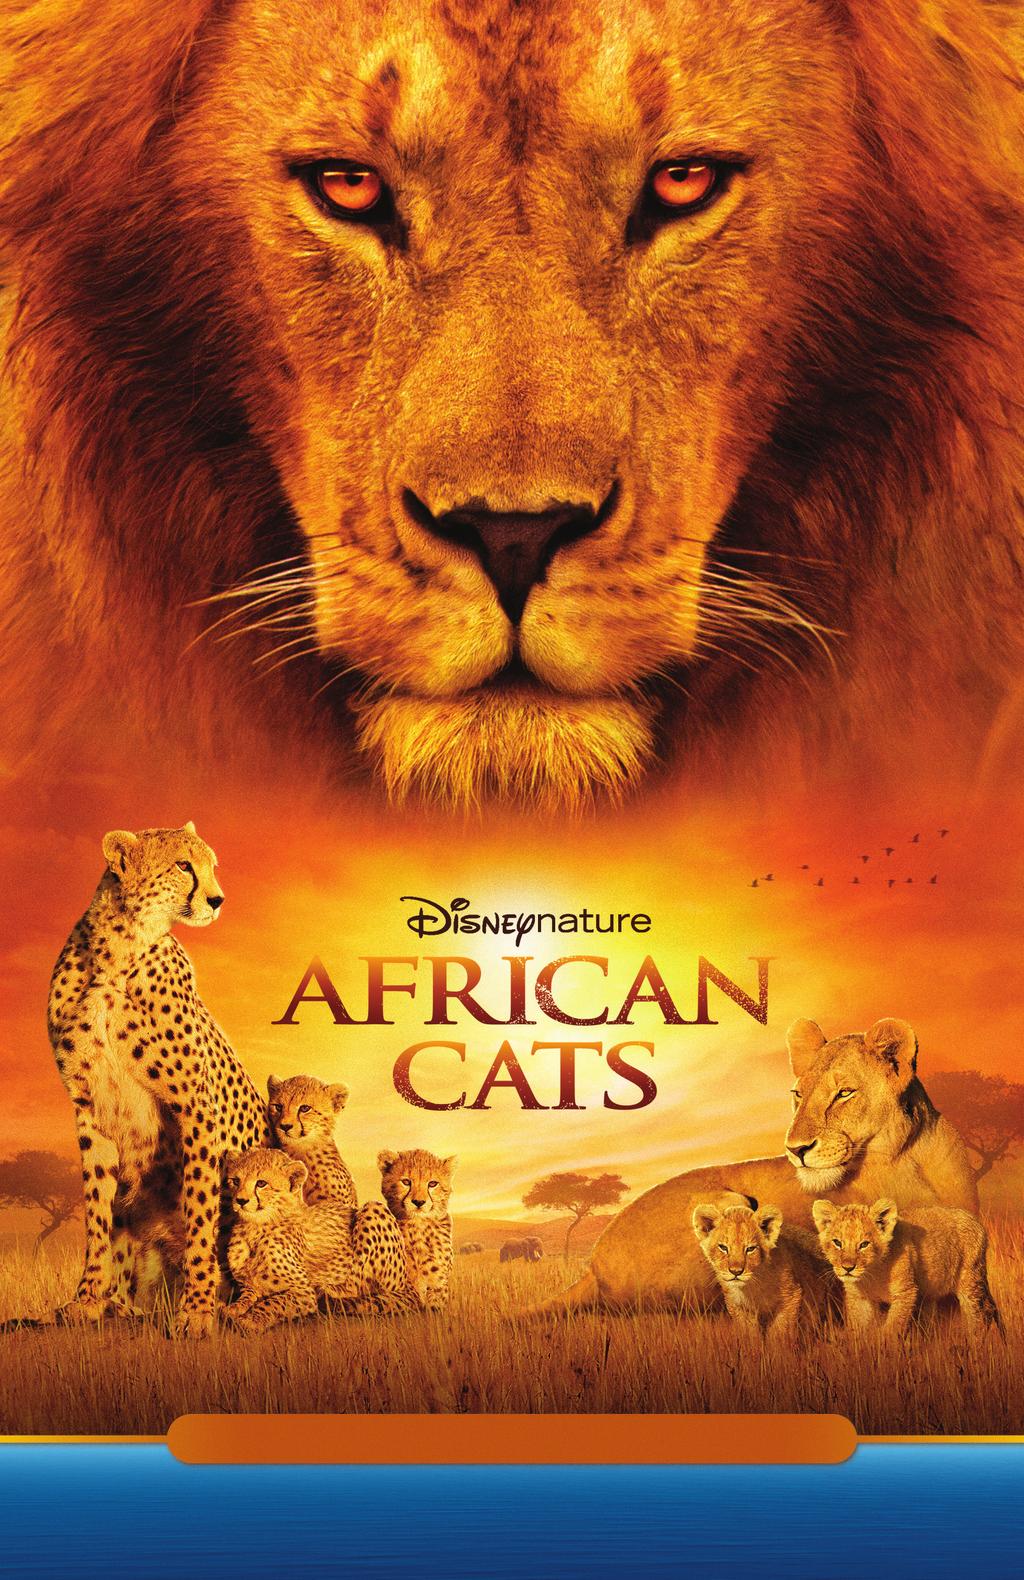 into the heart of Africa with AFRICAN CATS.